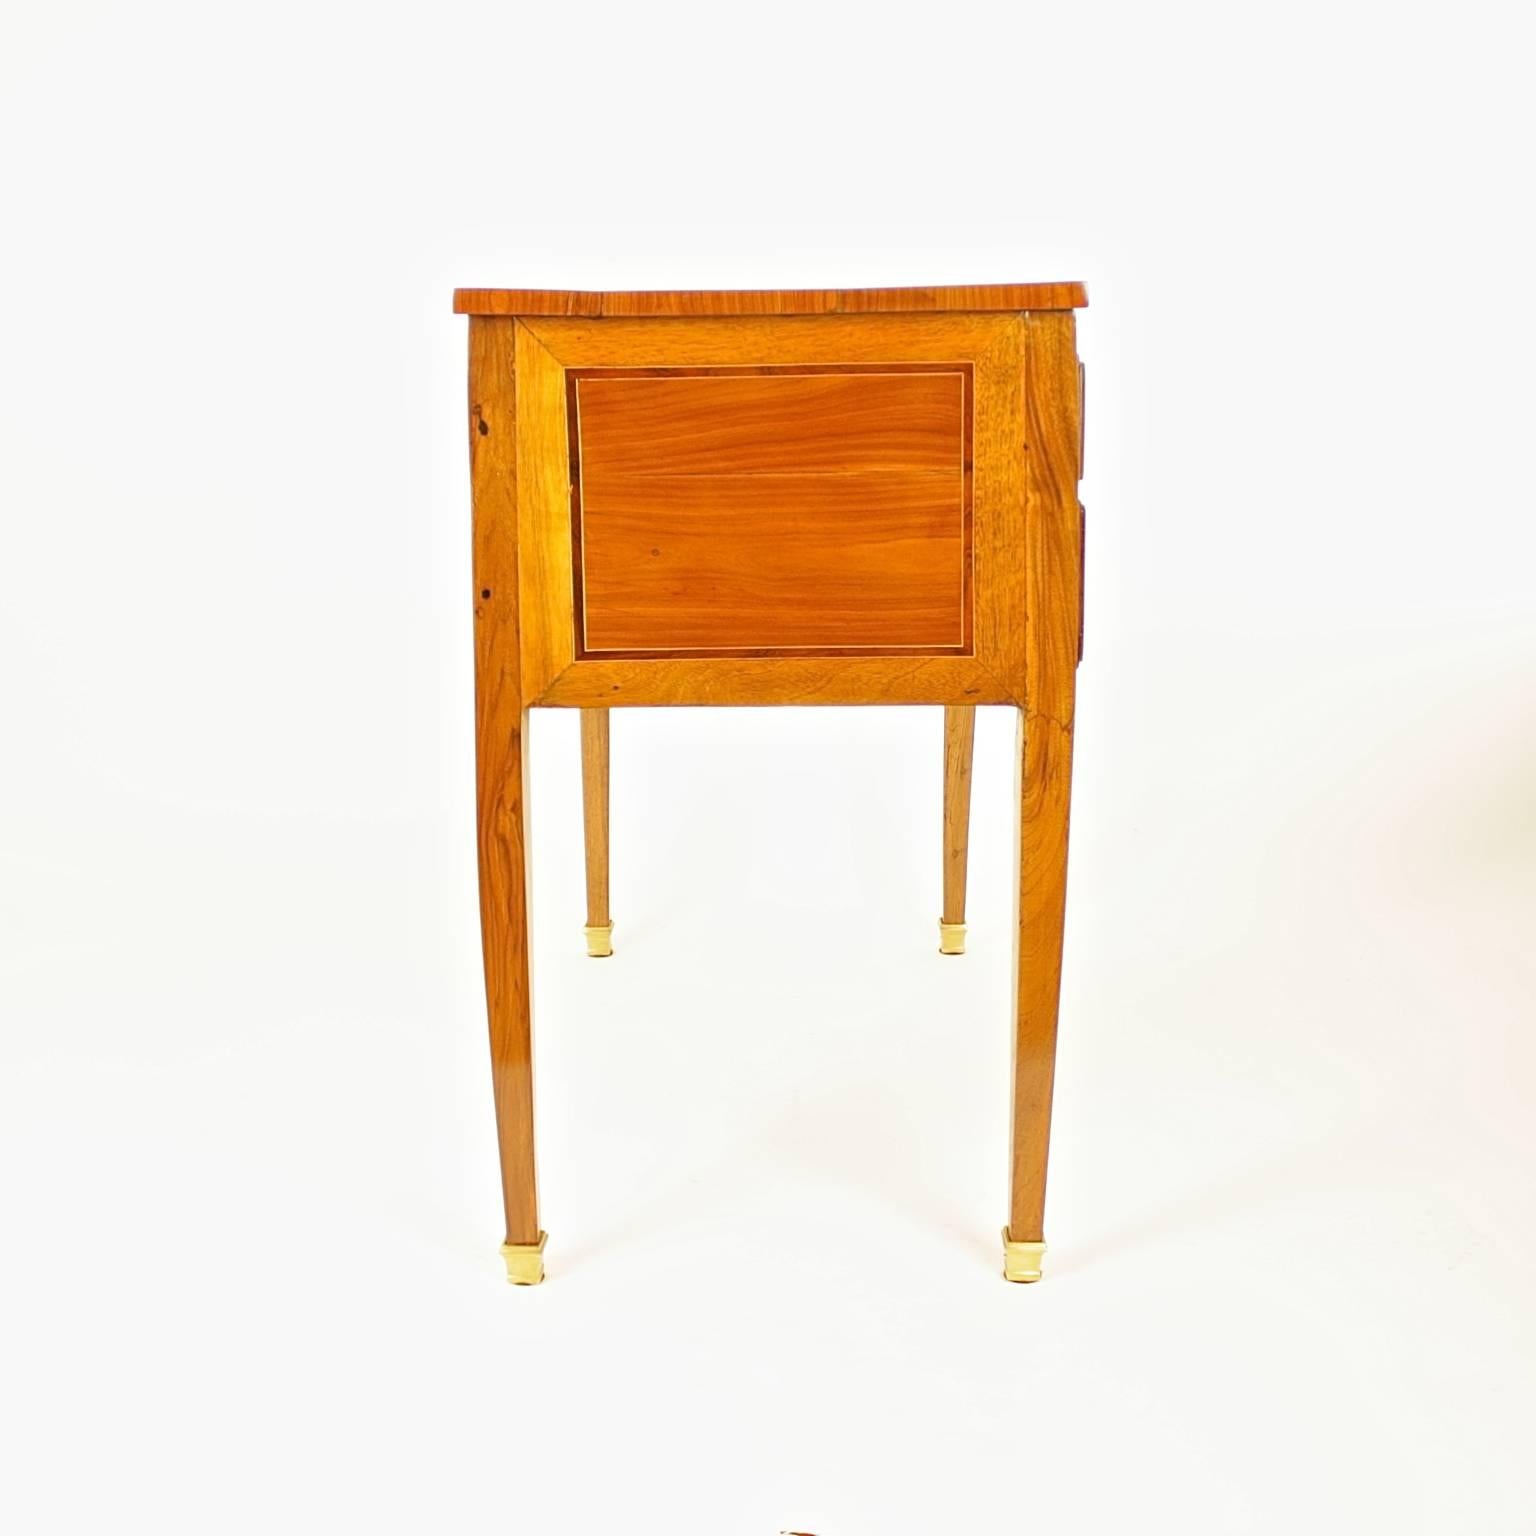 Late 18th Century French Marquetry Desk, in the manner of J.Birckle 1734-1803 1